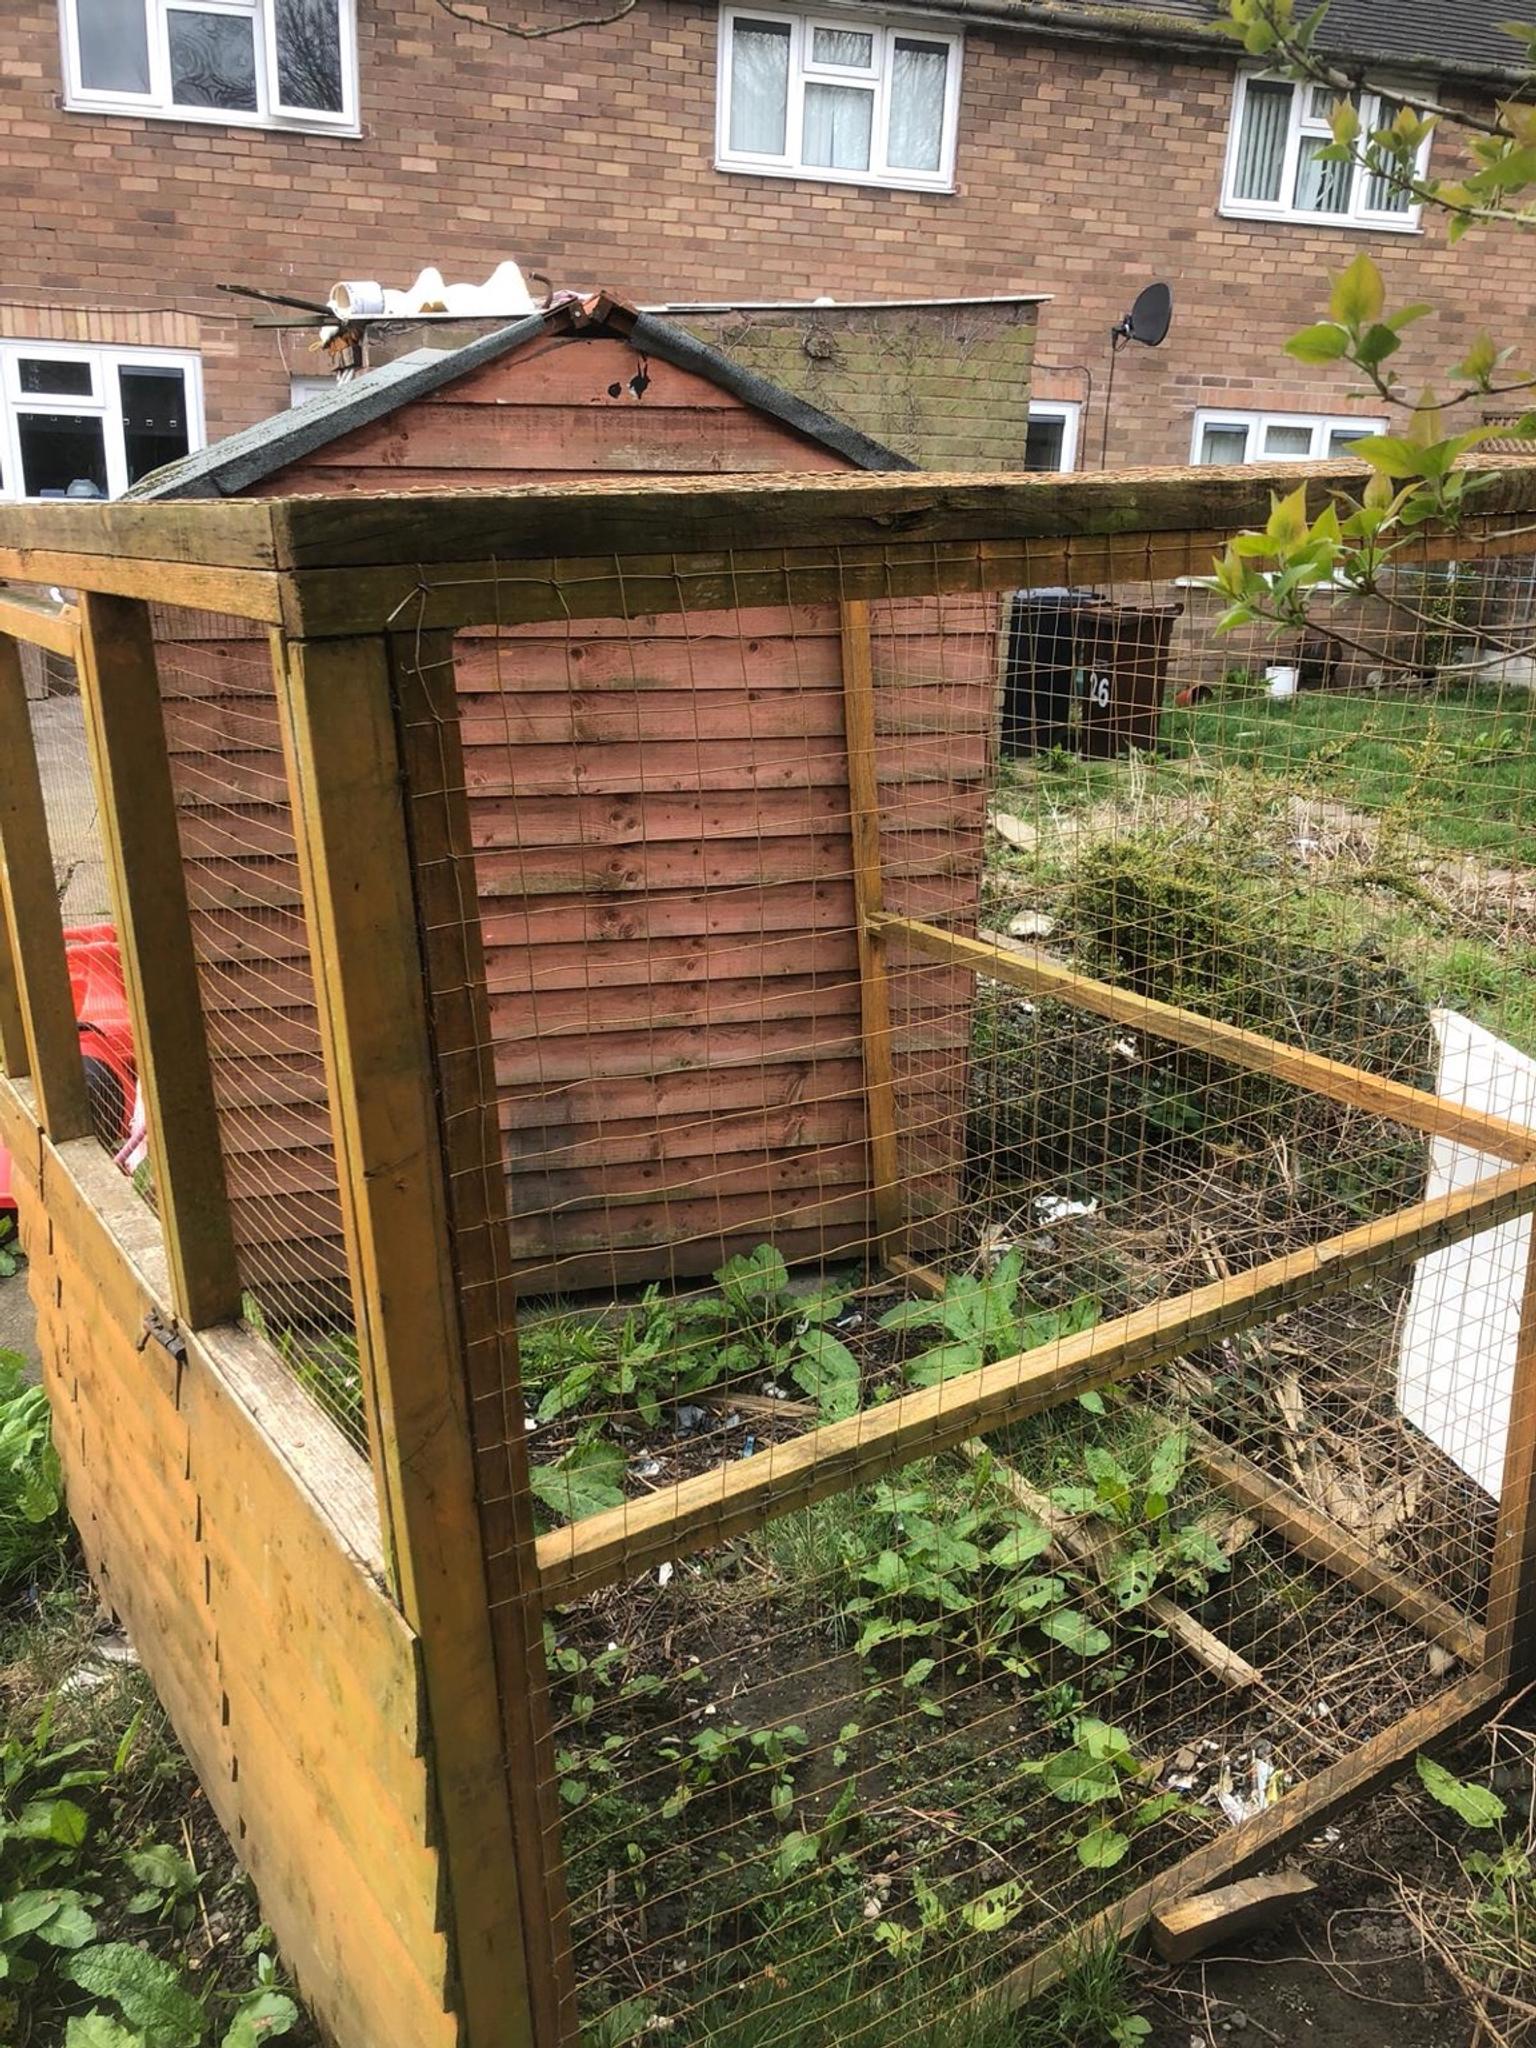 Dog Run In Wv10 Wolverhampton For 70 00 For Sale Shpock